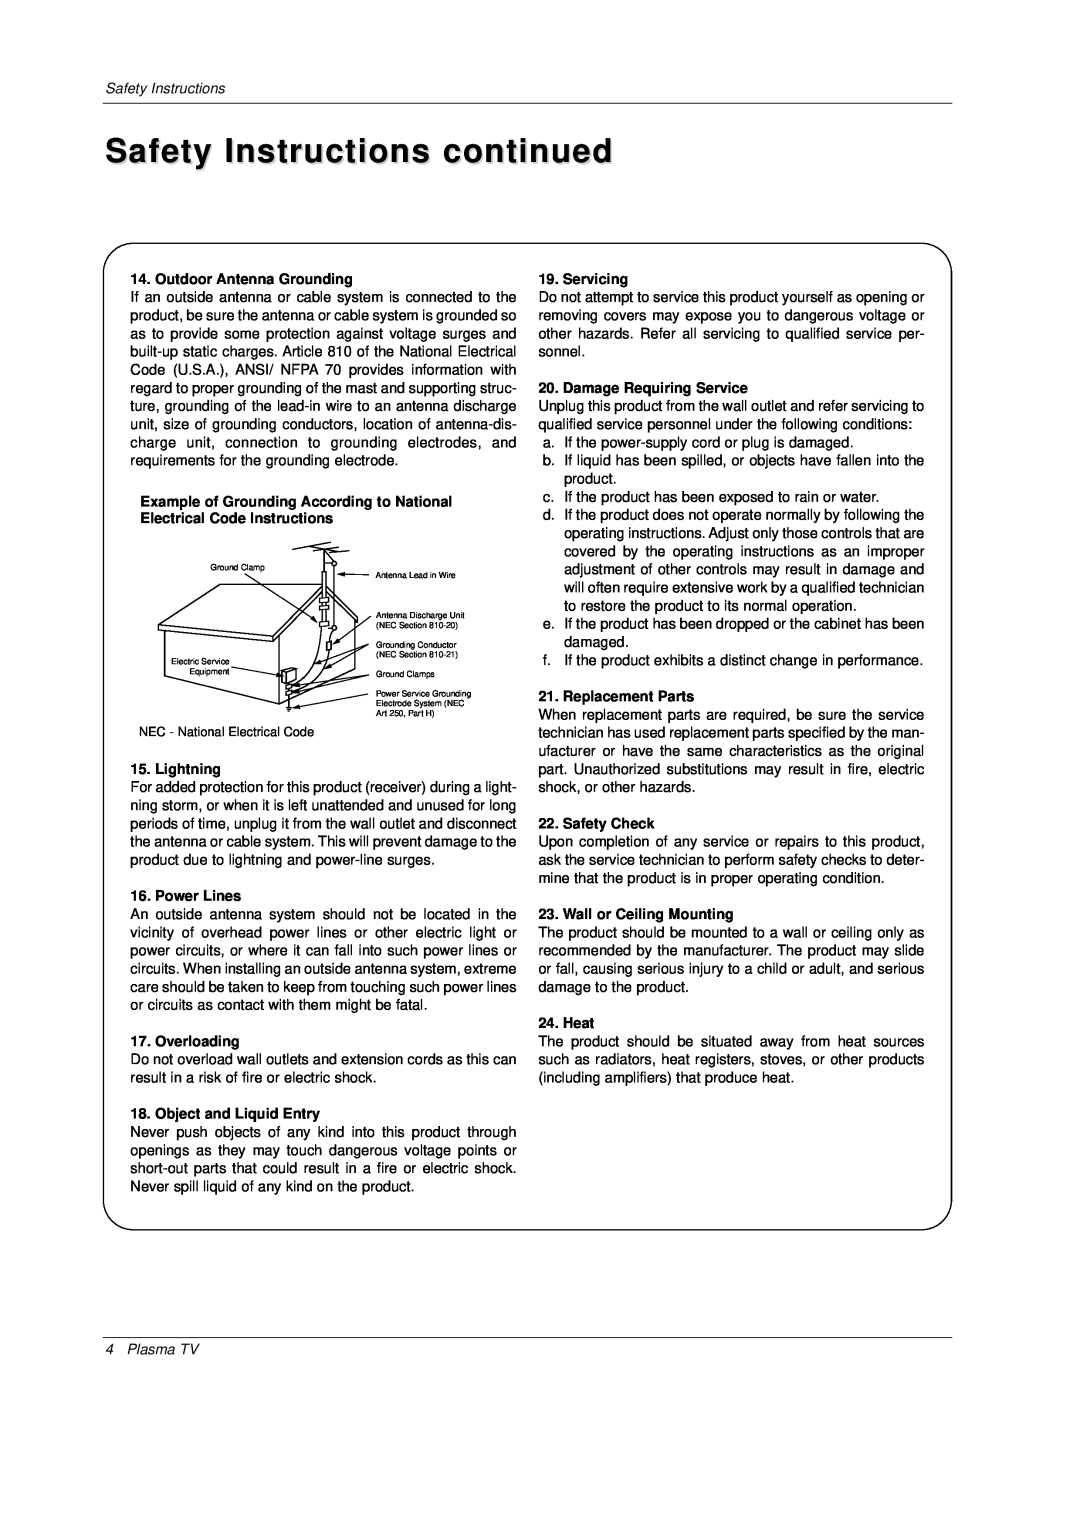 Mitsubishi Electronics PD-4225S Safety Instructions continued, Outdoor Antenna Grounding, Lightning, Power Lines, Heat 